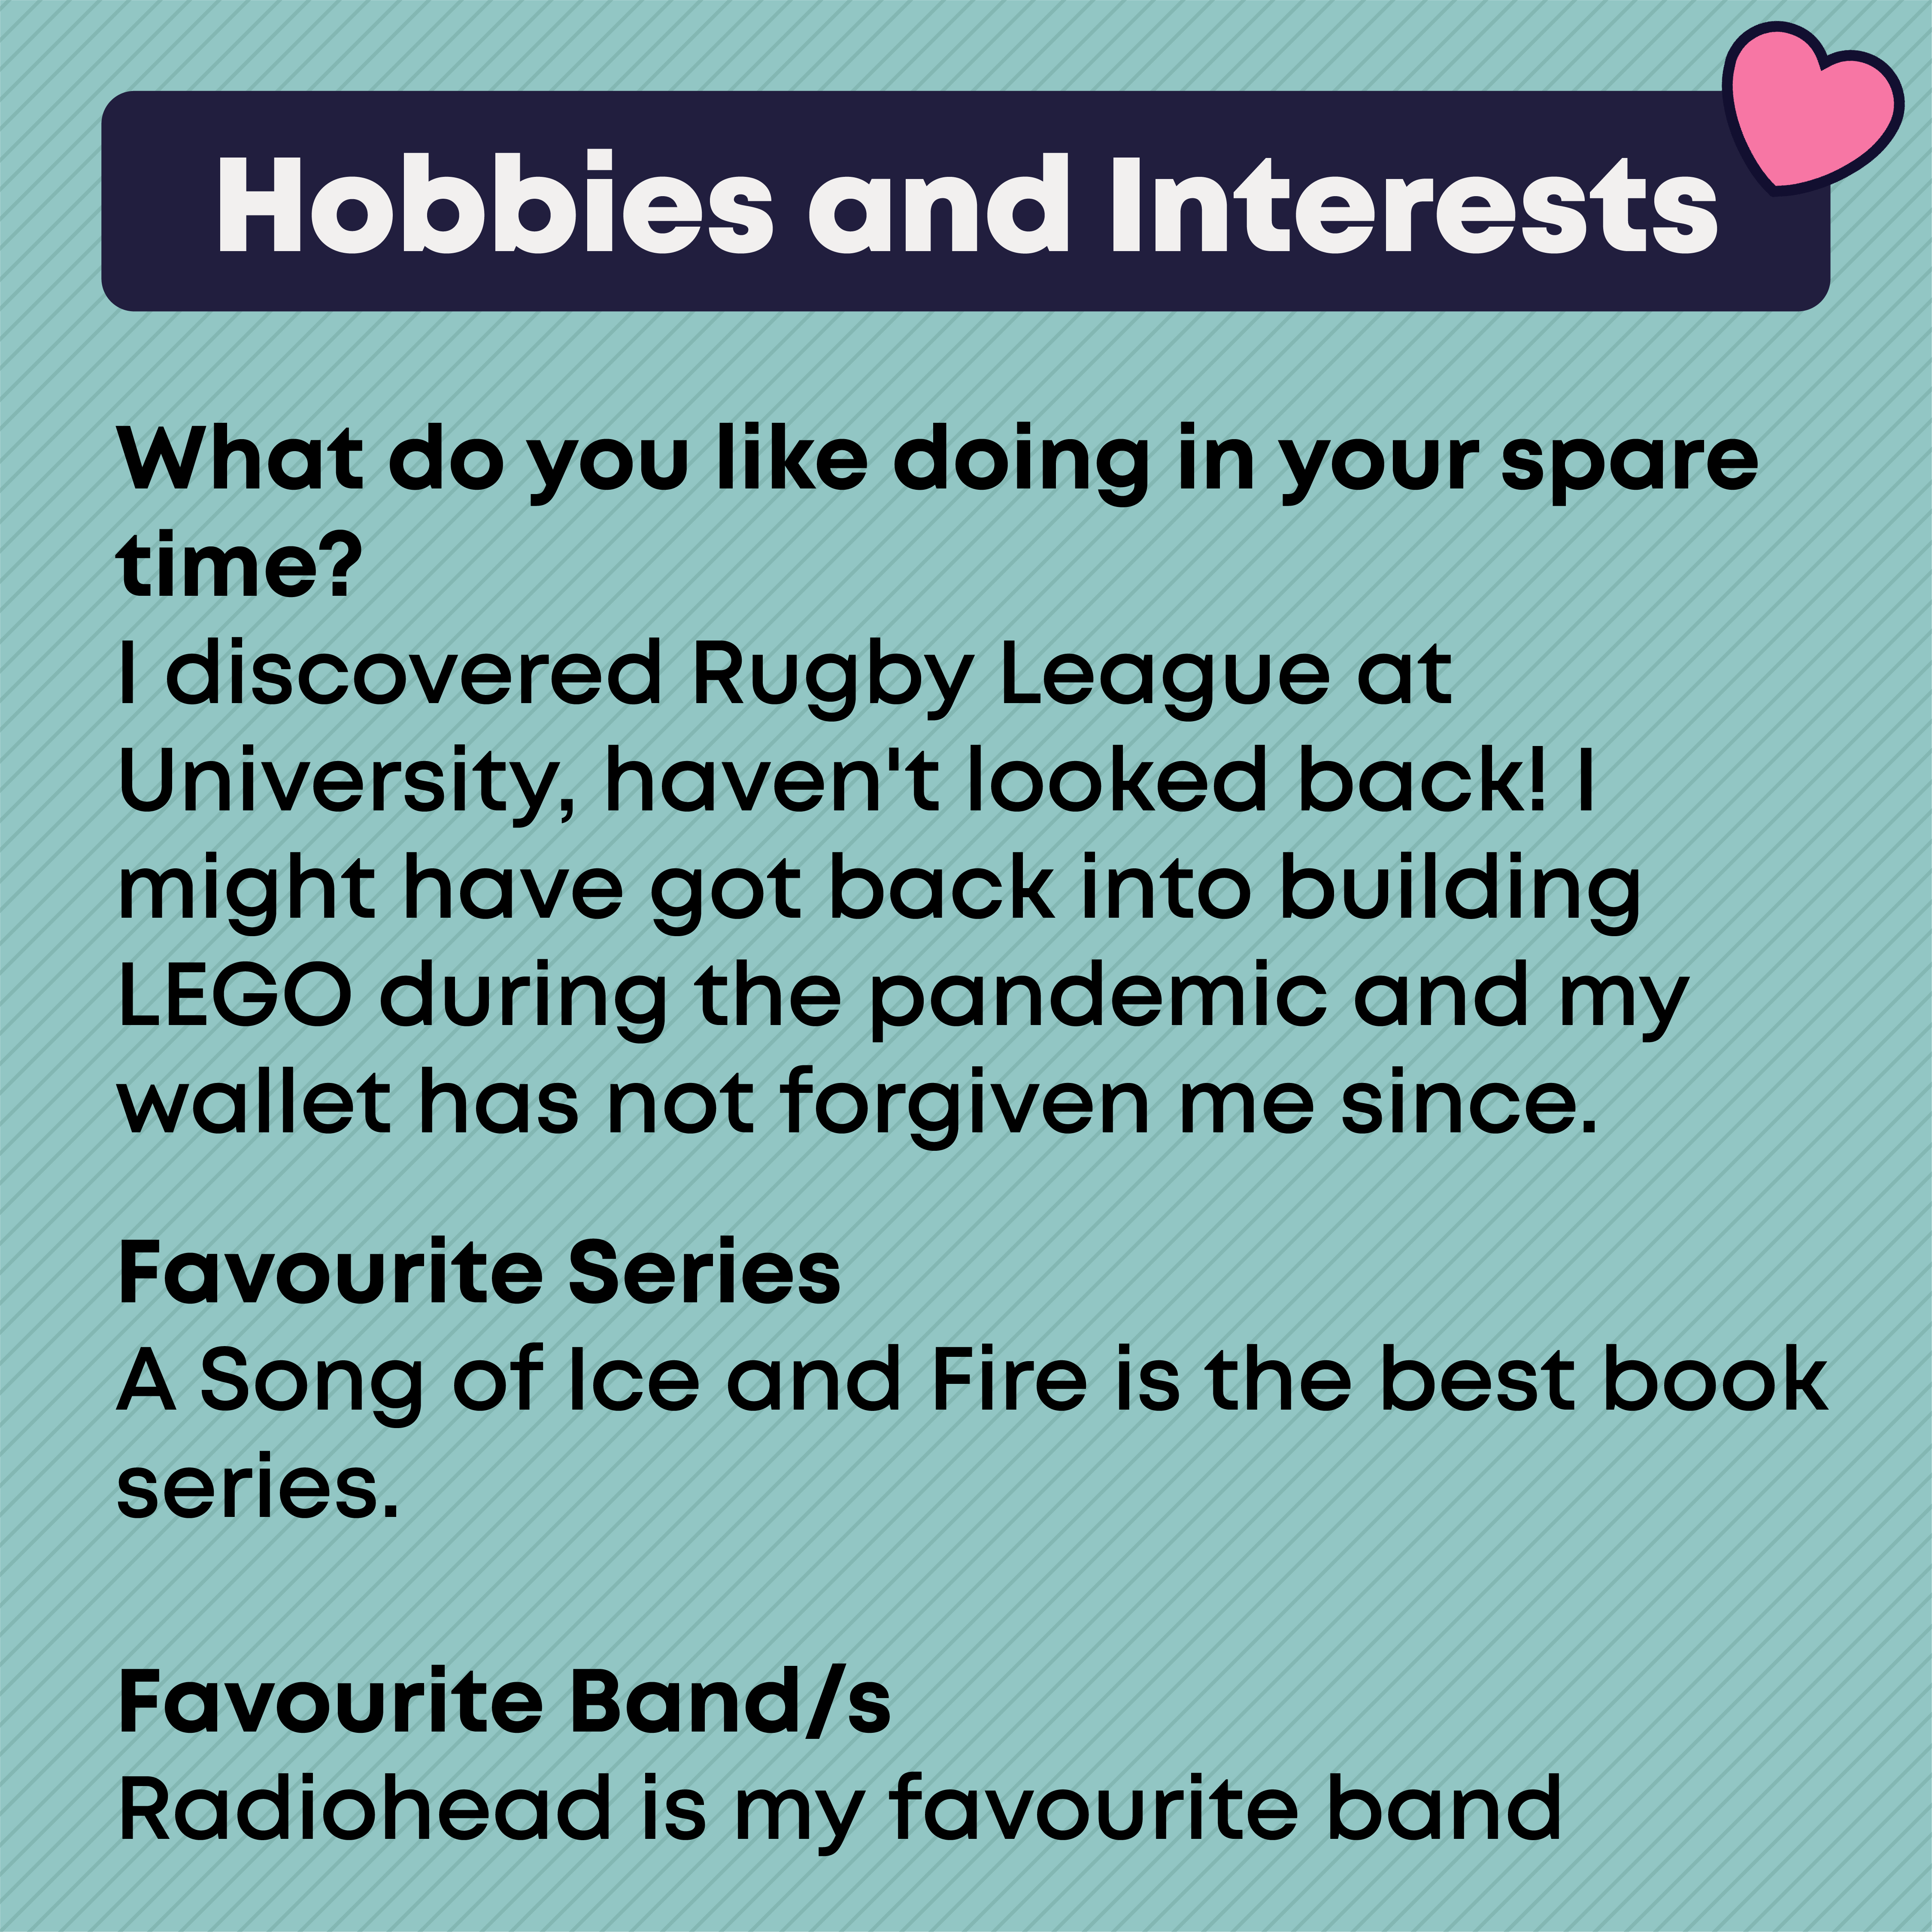 Hobbies and Interests: I discovered Rugby League at University, haven't looked back!    Radiohead is my favourite band.      A Song of Ice and Fire is the best book series.    I might have got back into building LEGO during the pandemic and my wallet has not forgiven me since.